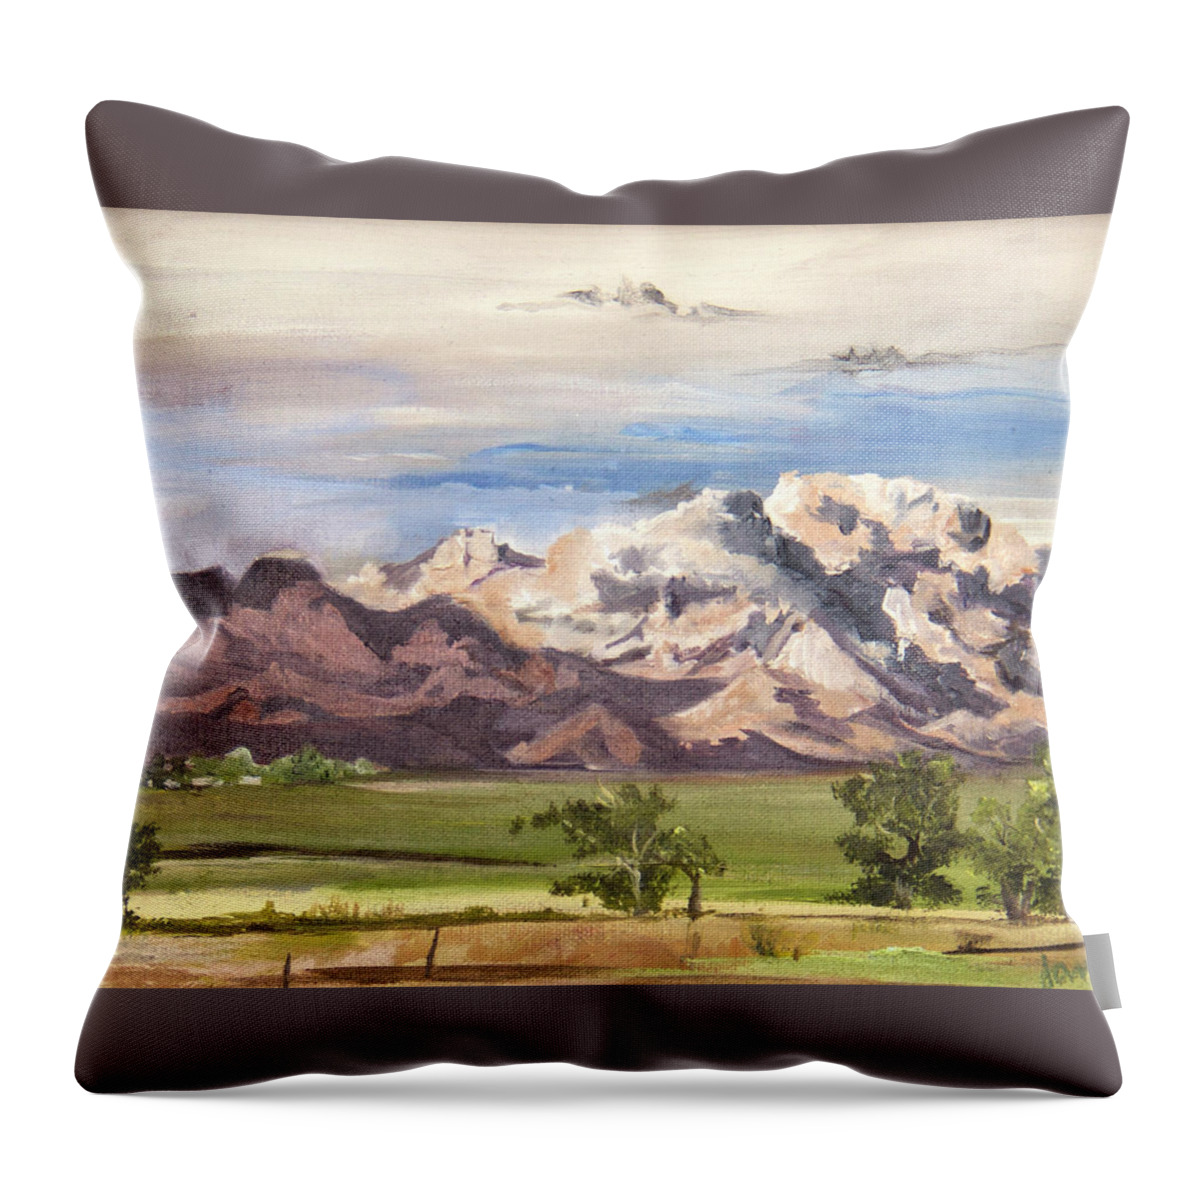 Landscape Throw Pillow featuring the painting Split Mountain by Nila Jane Autry